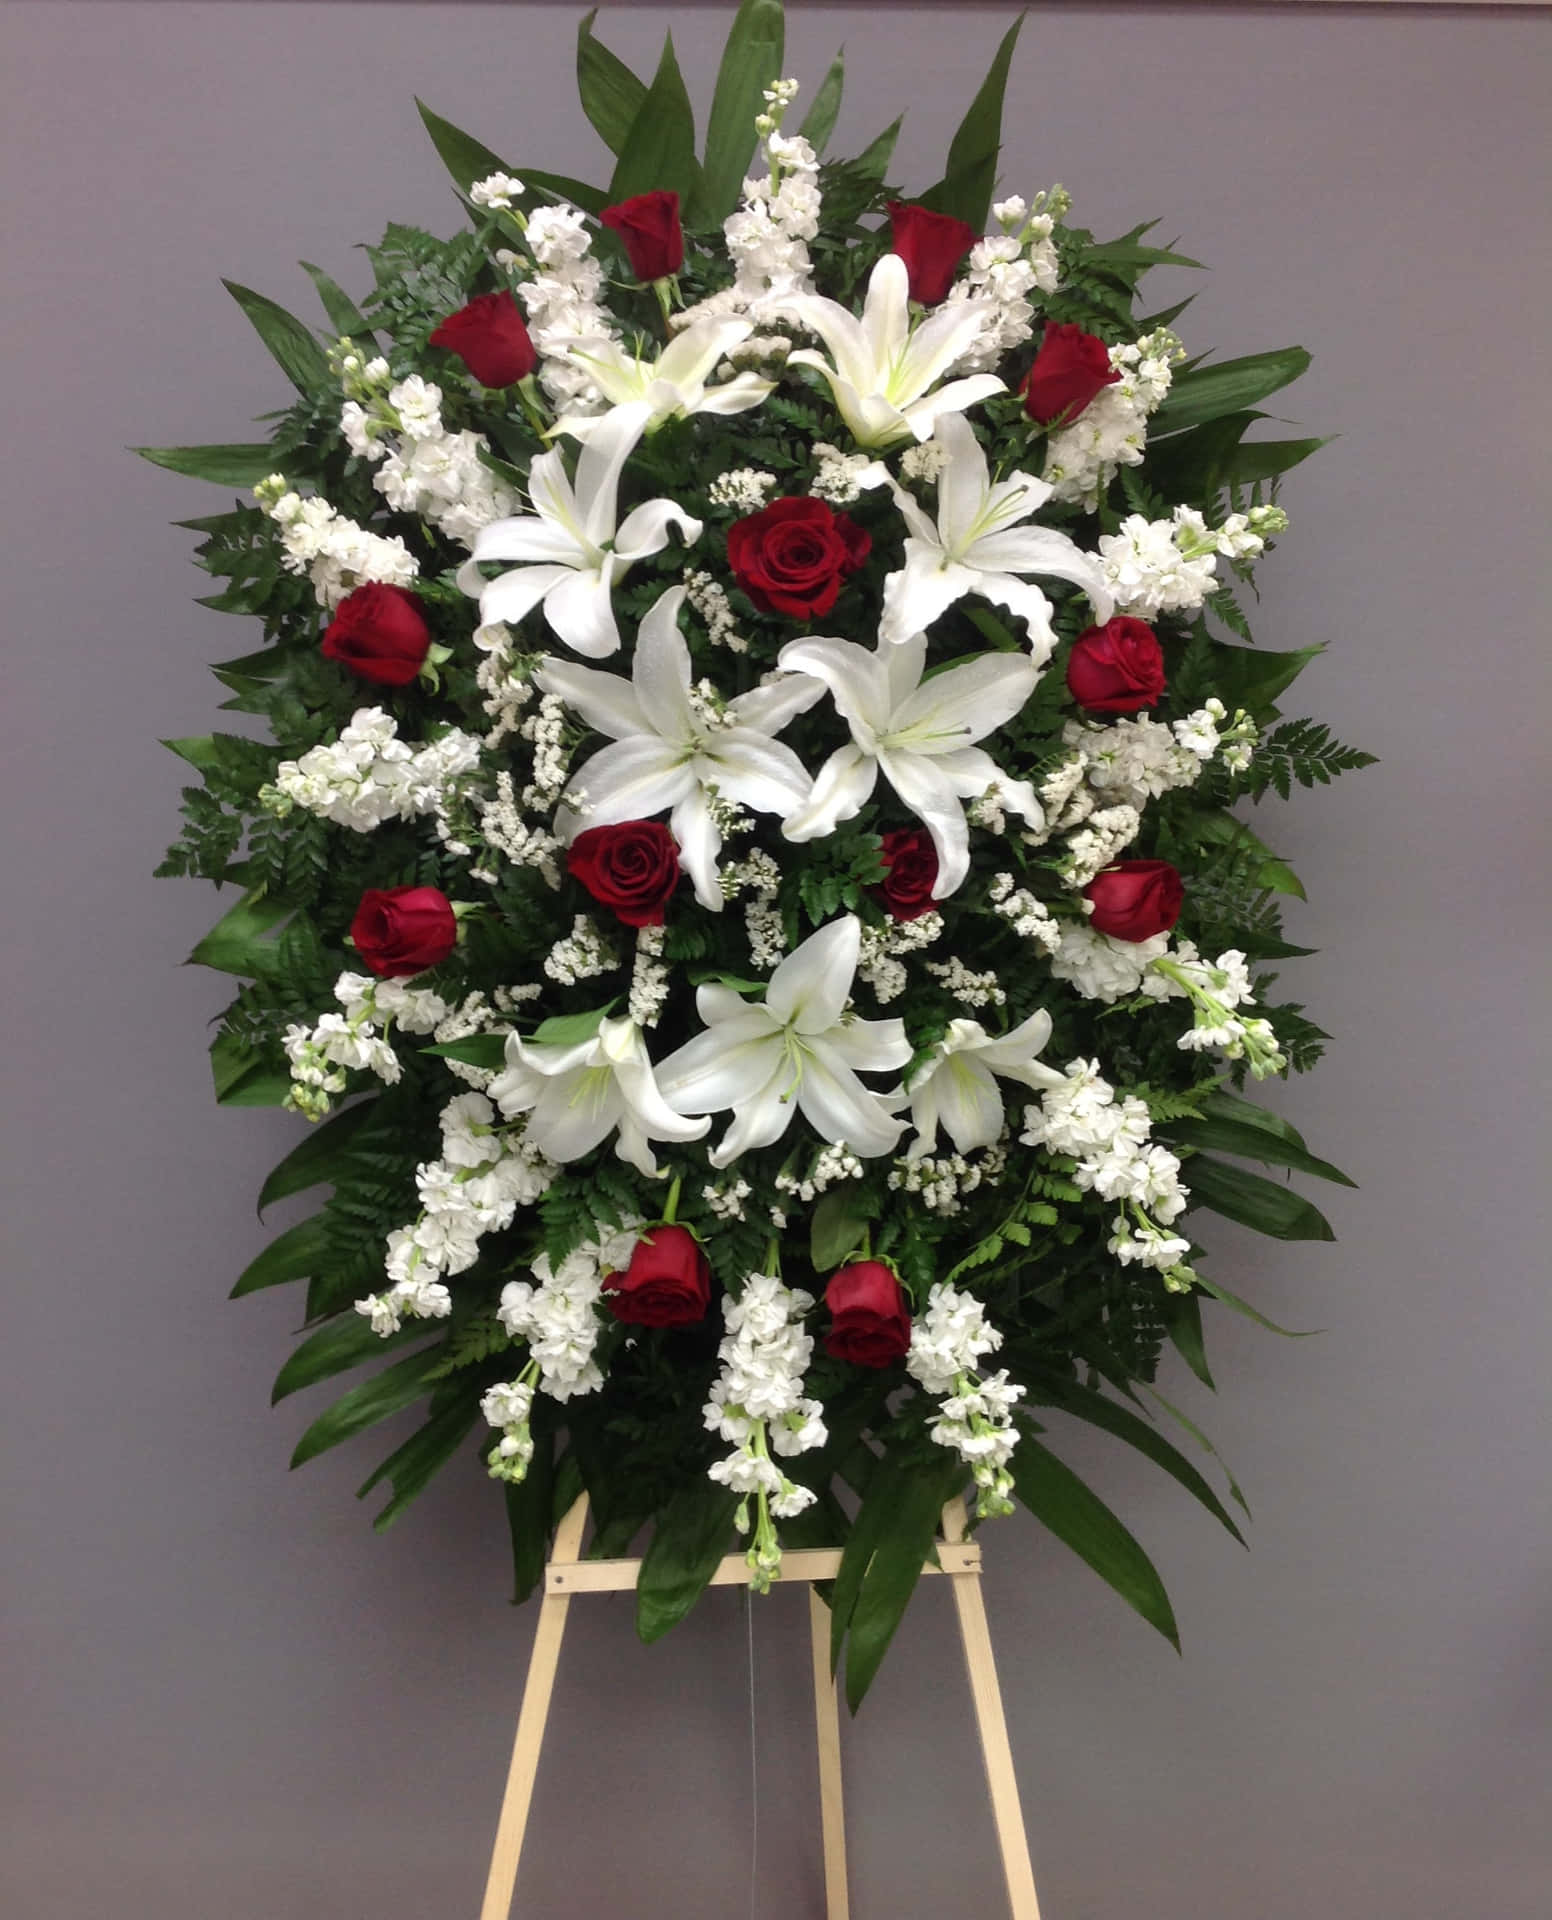 A funeral floral tribute honoring the memory of a beloved one.